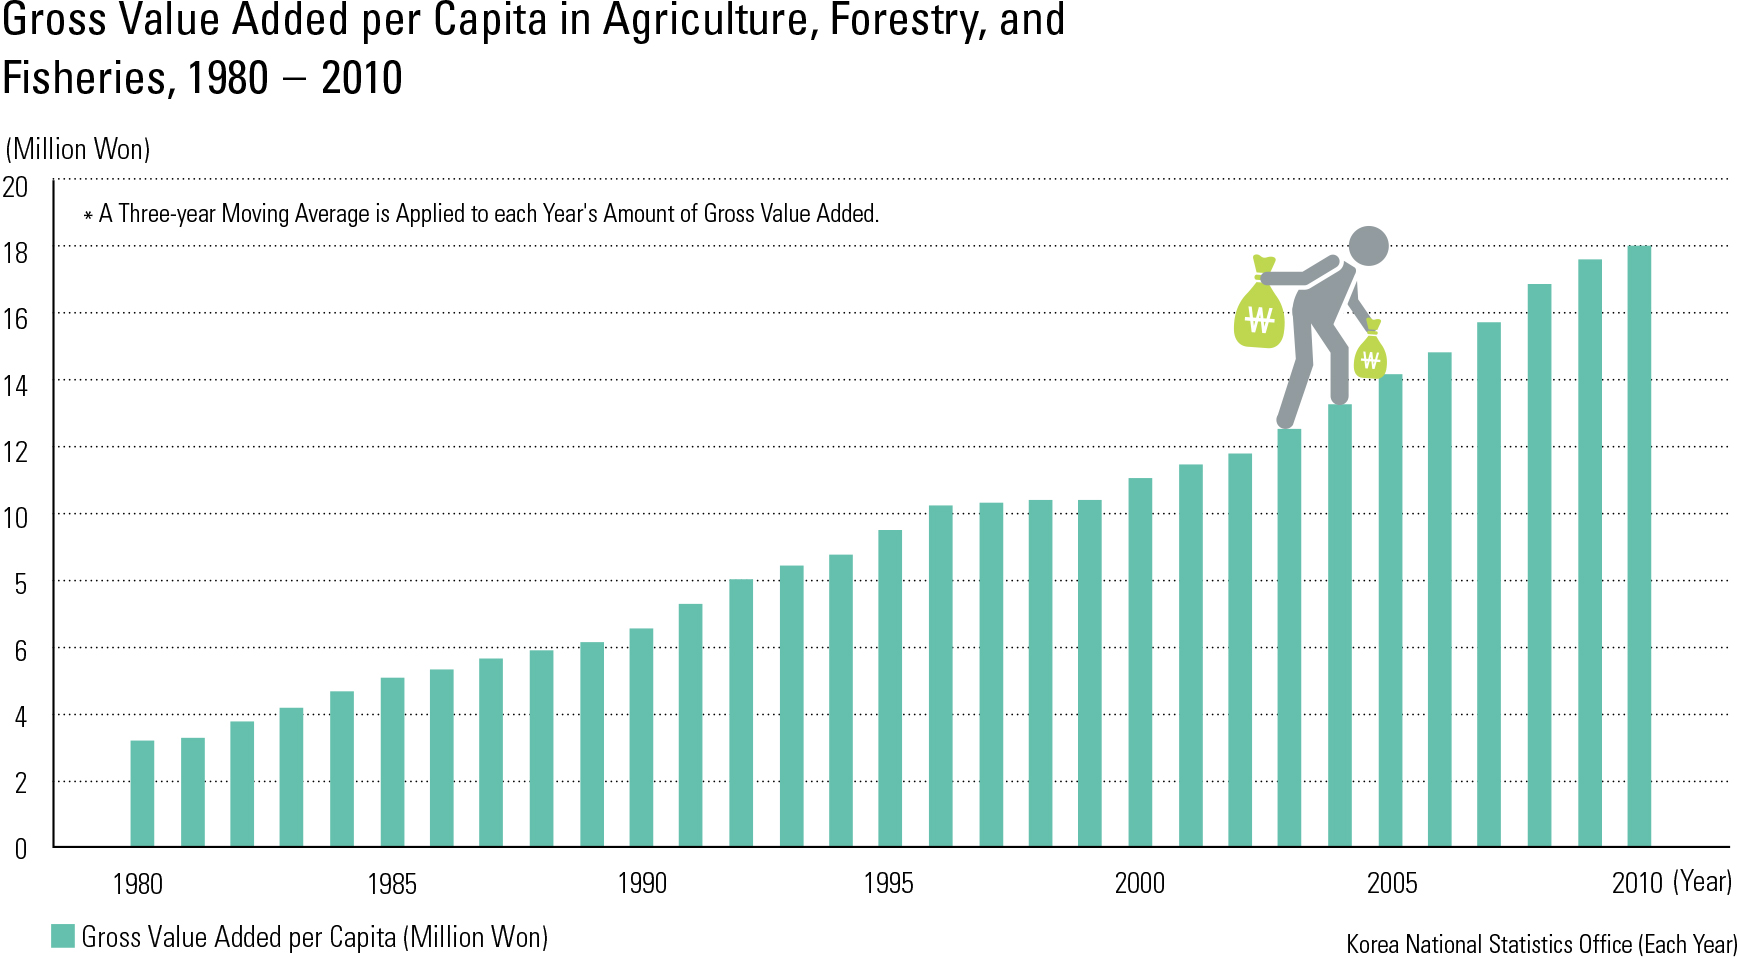 Gross Value Added per Capita in Agriculture, Forestry, and Fisheries, 1980 – 2010